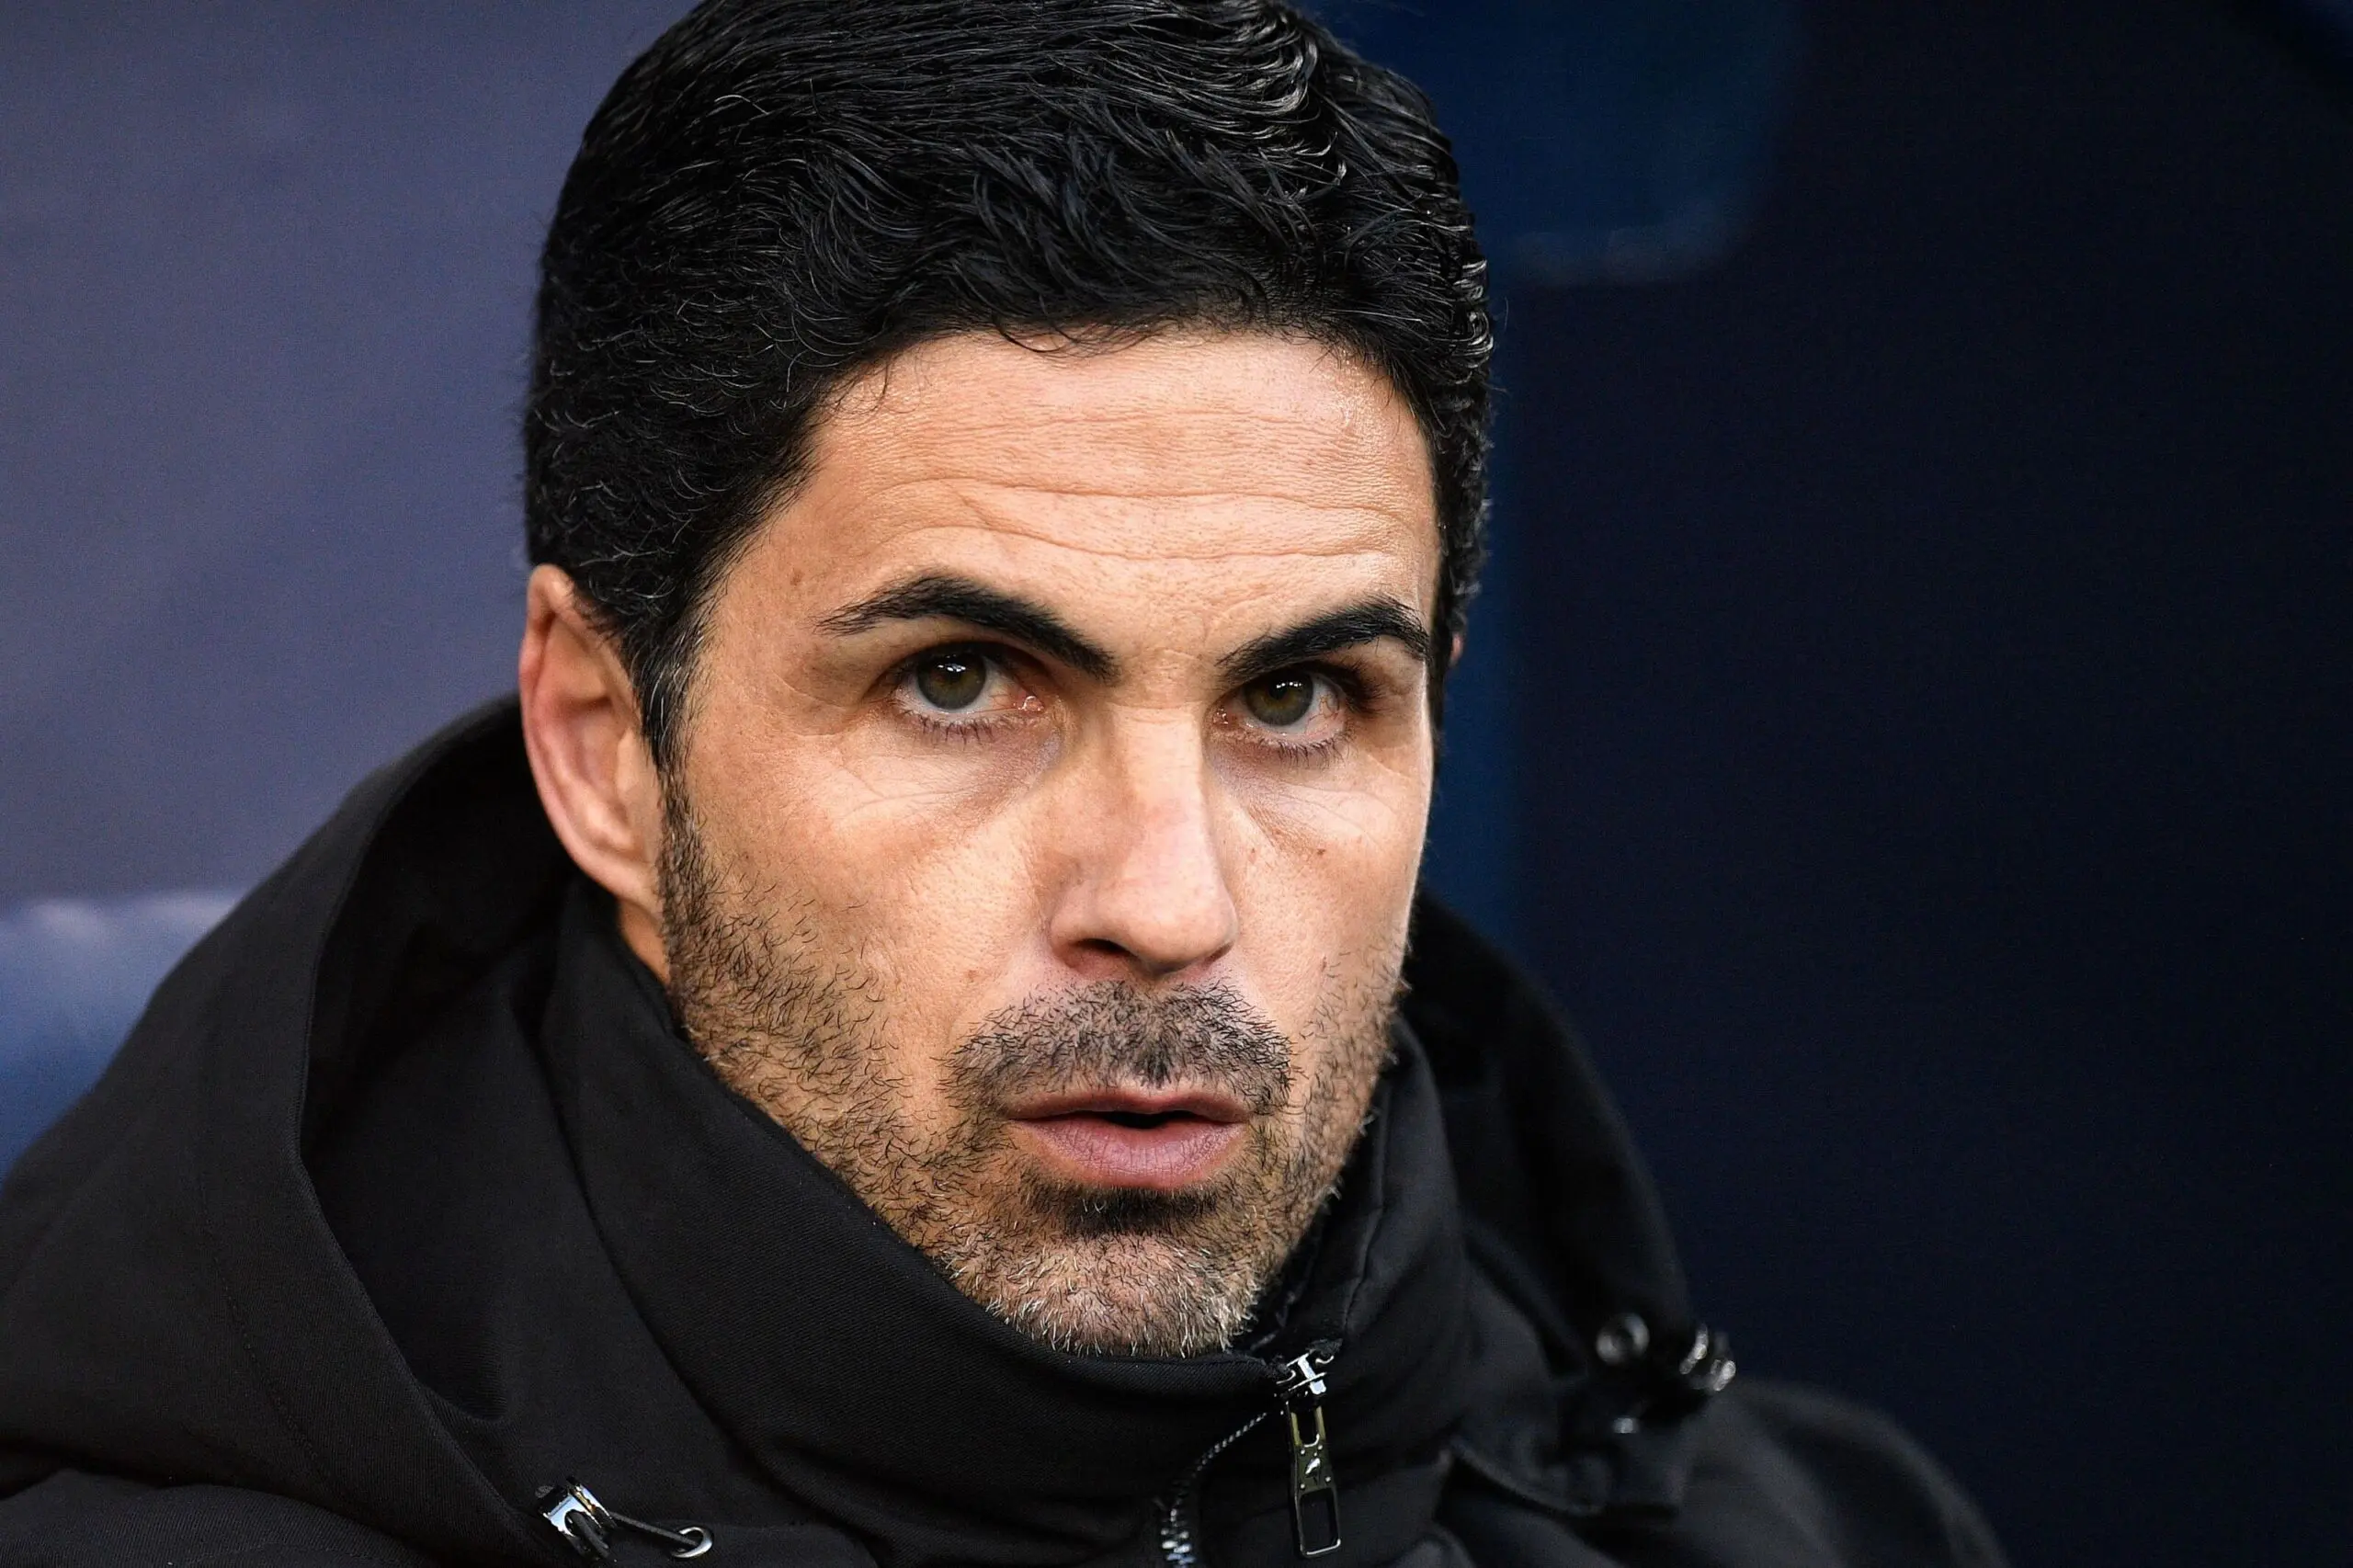 EPL: Arteta names player that will have 'really big' impact in title race